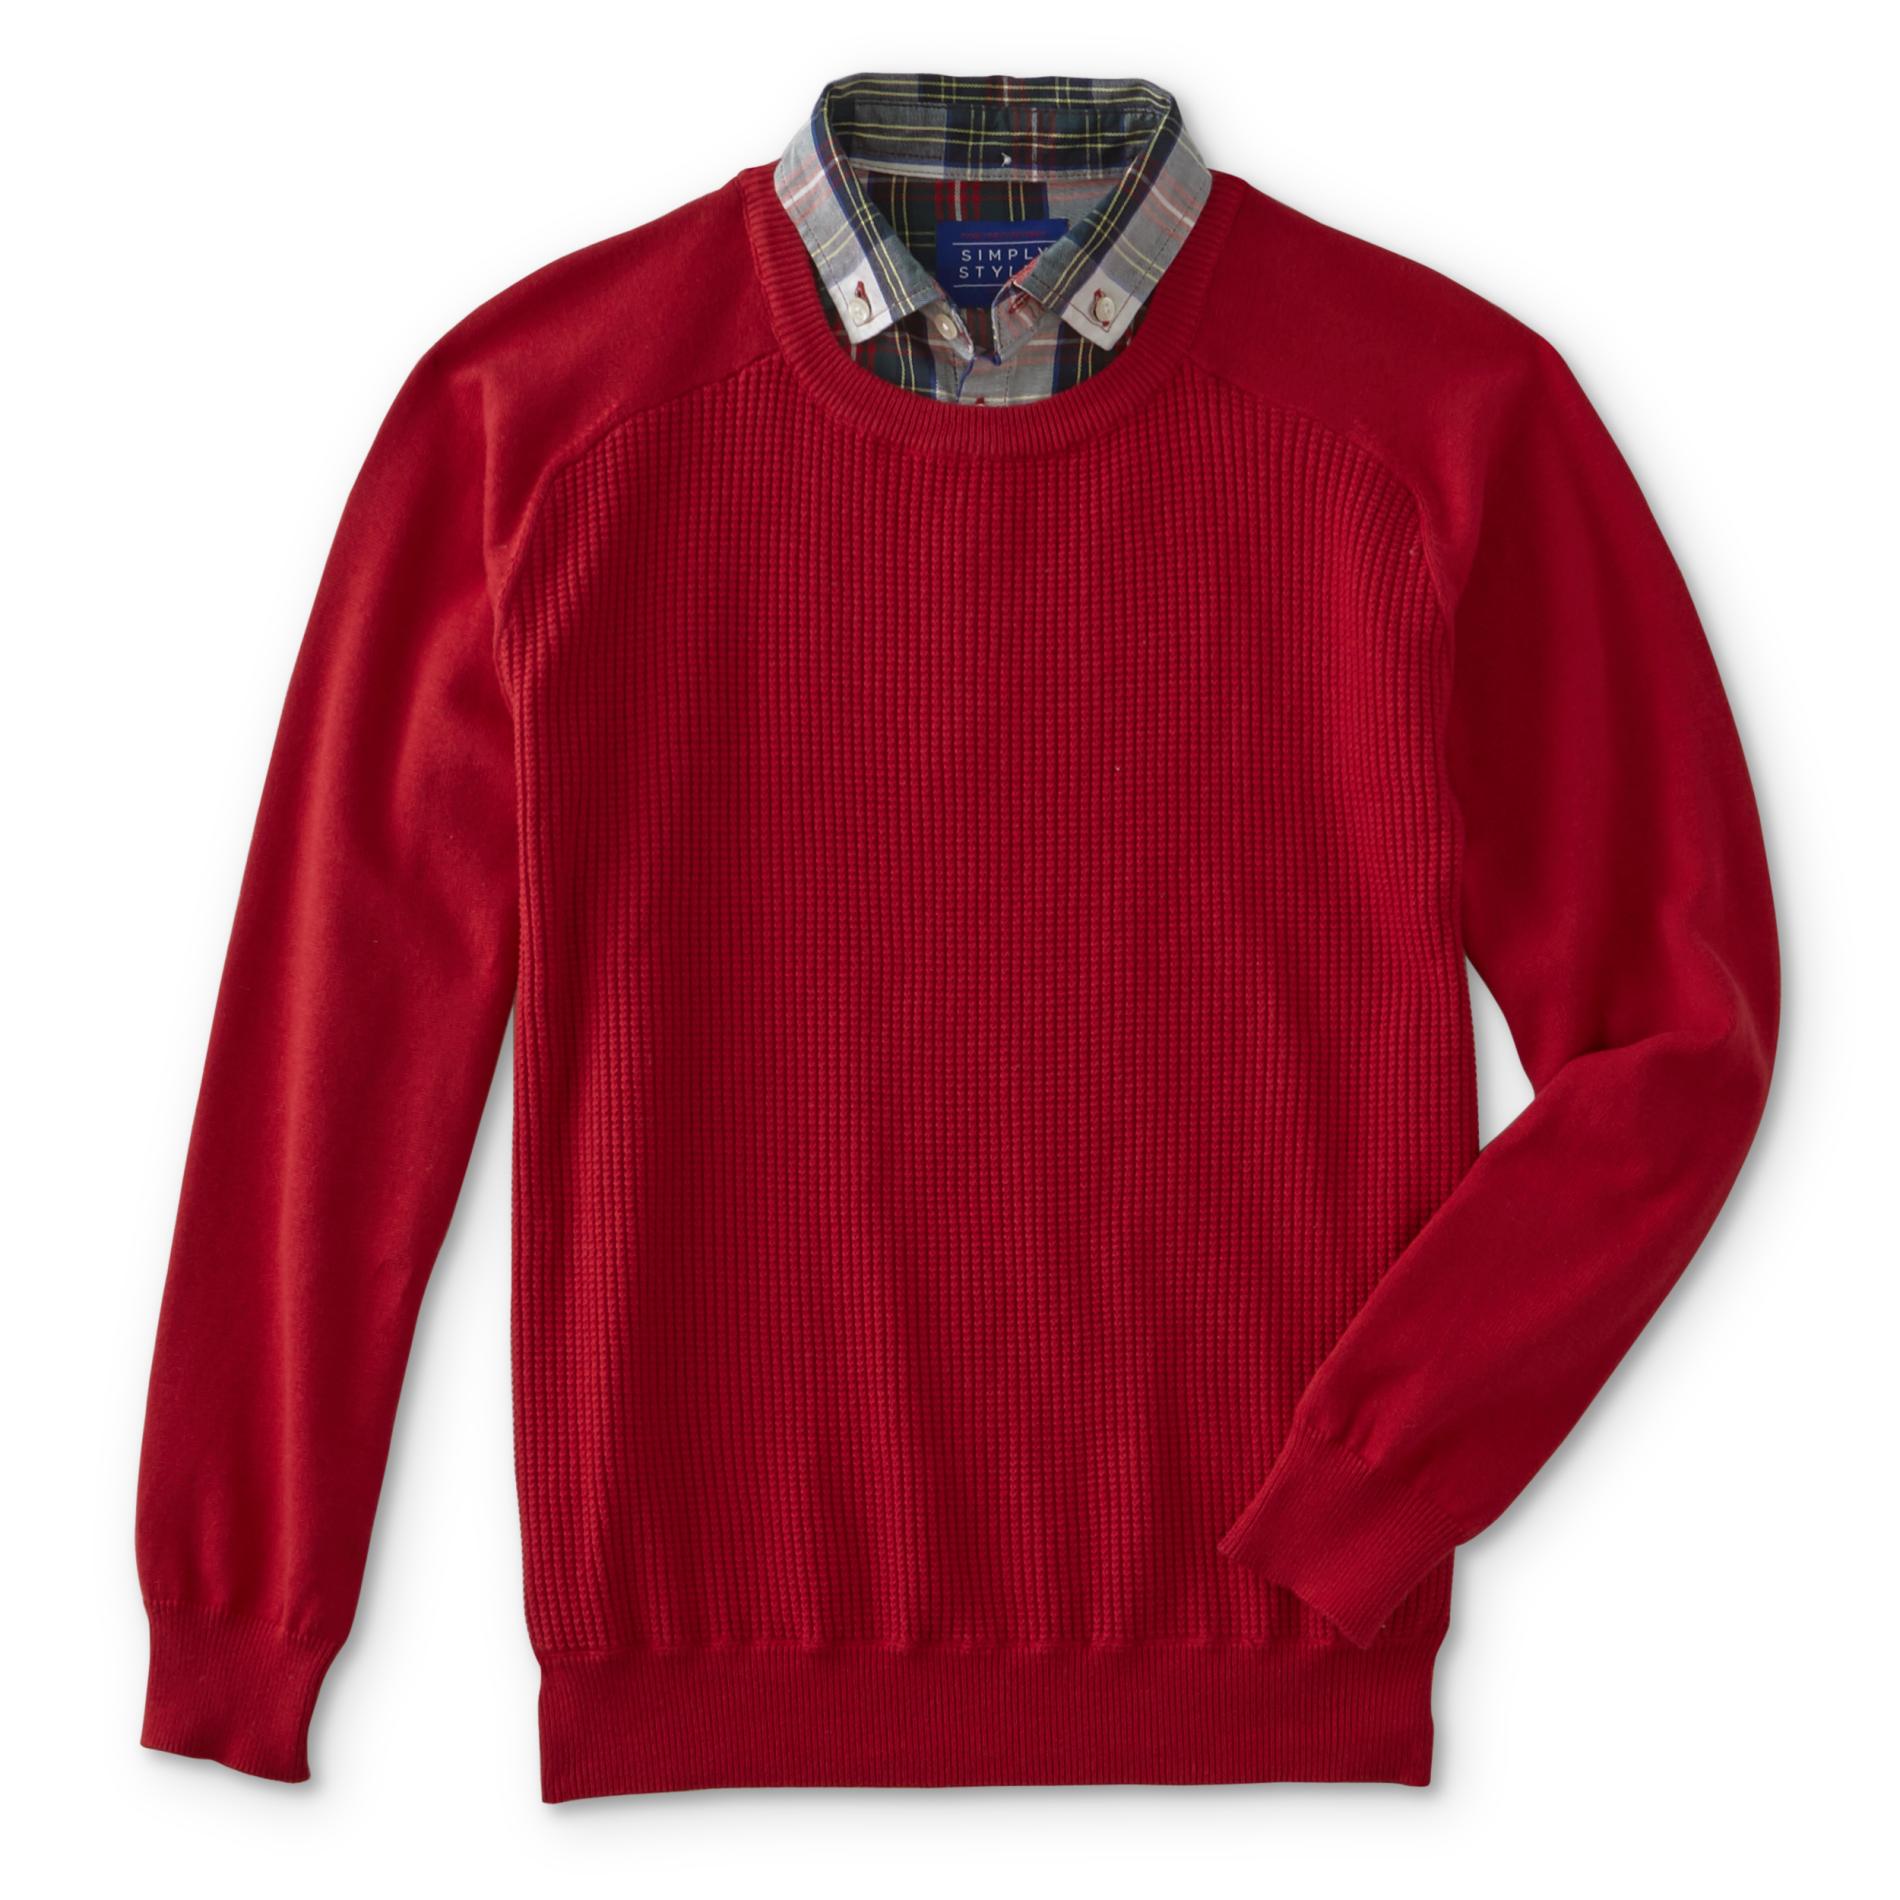 Simply Styled Boys' Layered-Look Long-Sleeve Sweater - Plaid | Shop ...